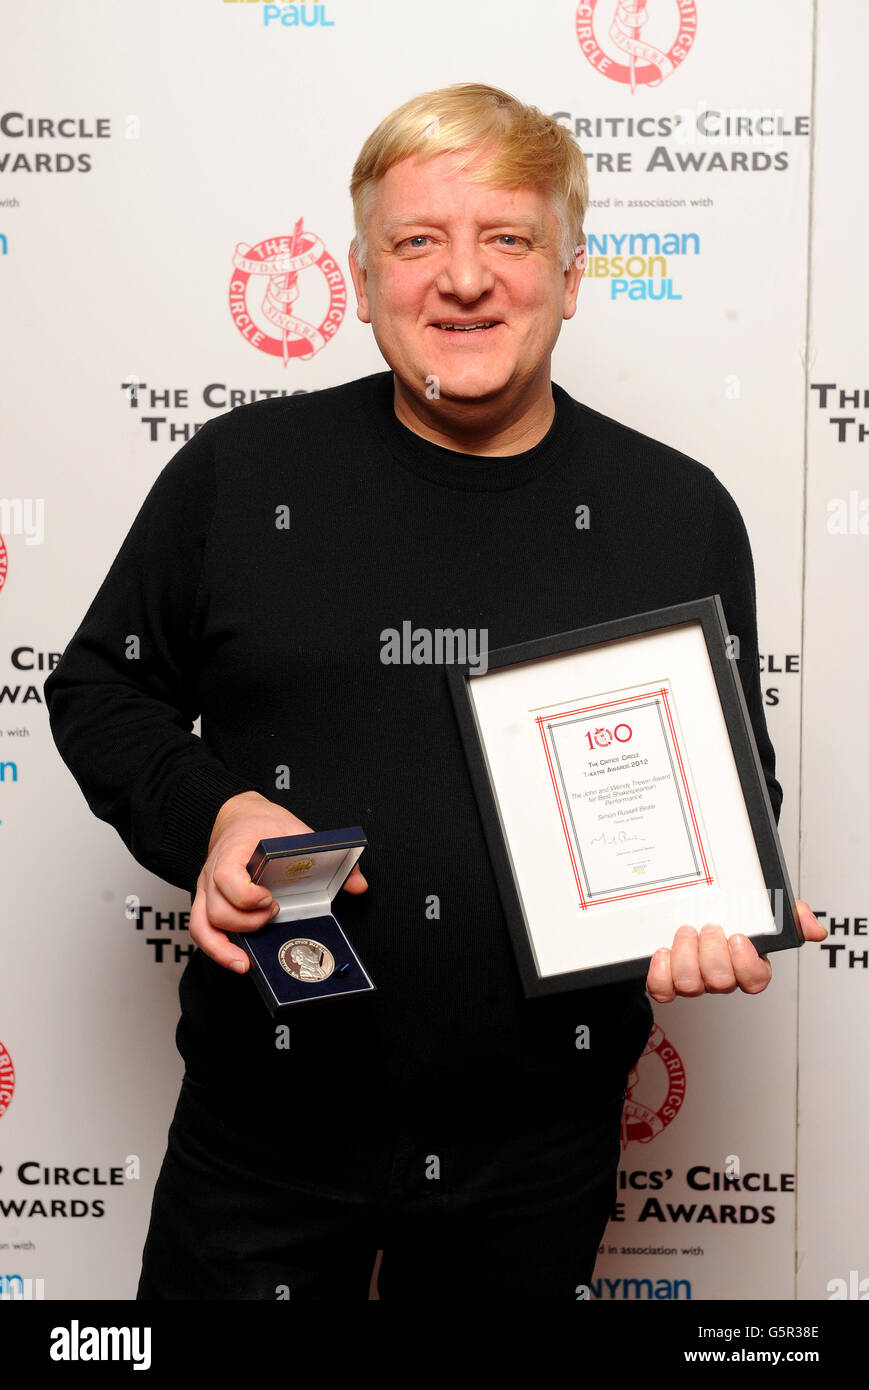 Simon Russell Beale wins the Best Shakespearean Performance award, in Timon of Athens, at the Critic's Circle Theatre awards held at the Prince of Wales theatre in London. Stock Photo